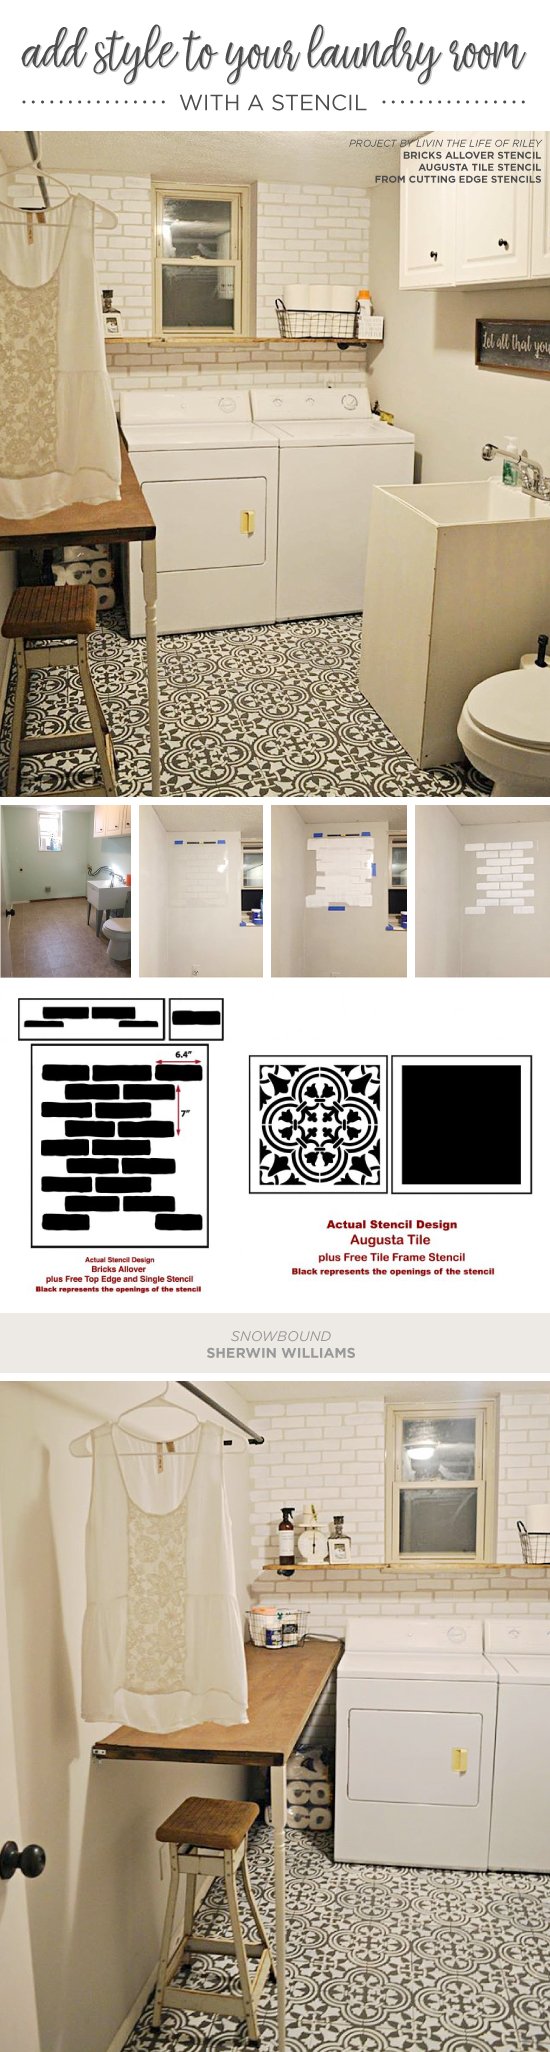 Cutting Edge Stencils shares a DIY stenciled laundry room accent wall that achieves a subway tile look using the Brick Allover Stencil. http://www.cuttingedgestencils.com/bricks-stencil-allover-pattern-stencils.html